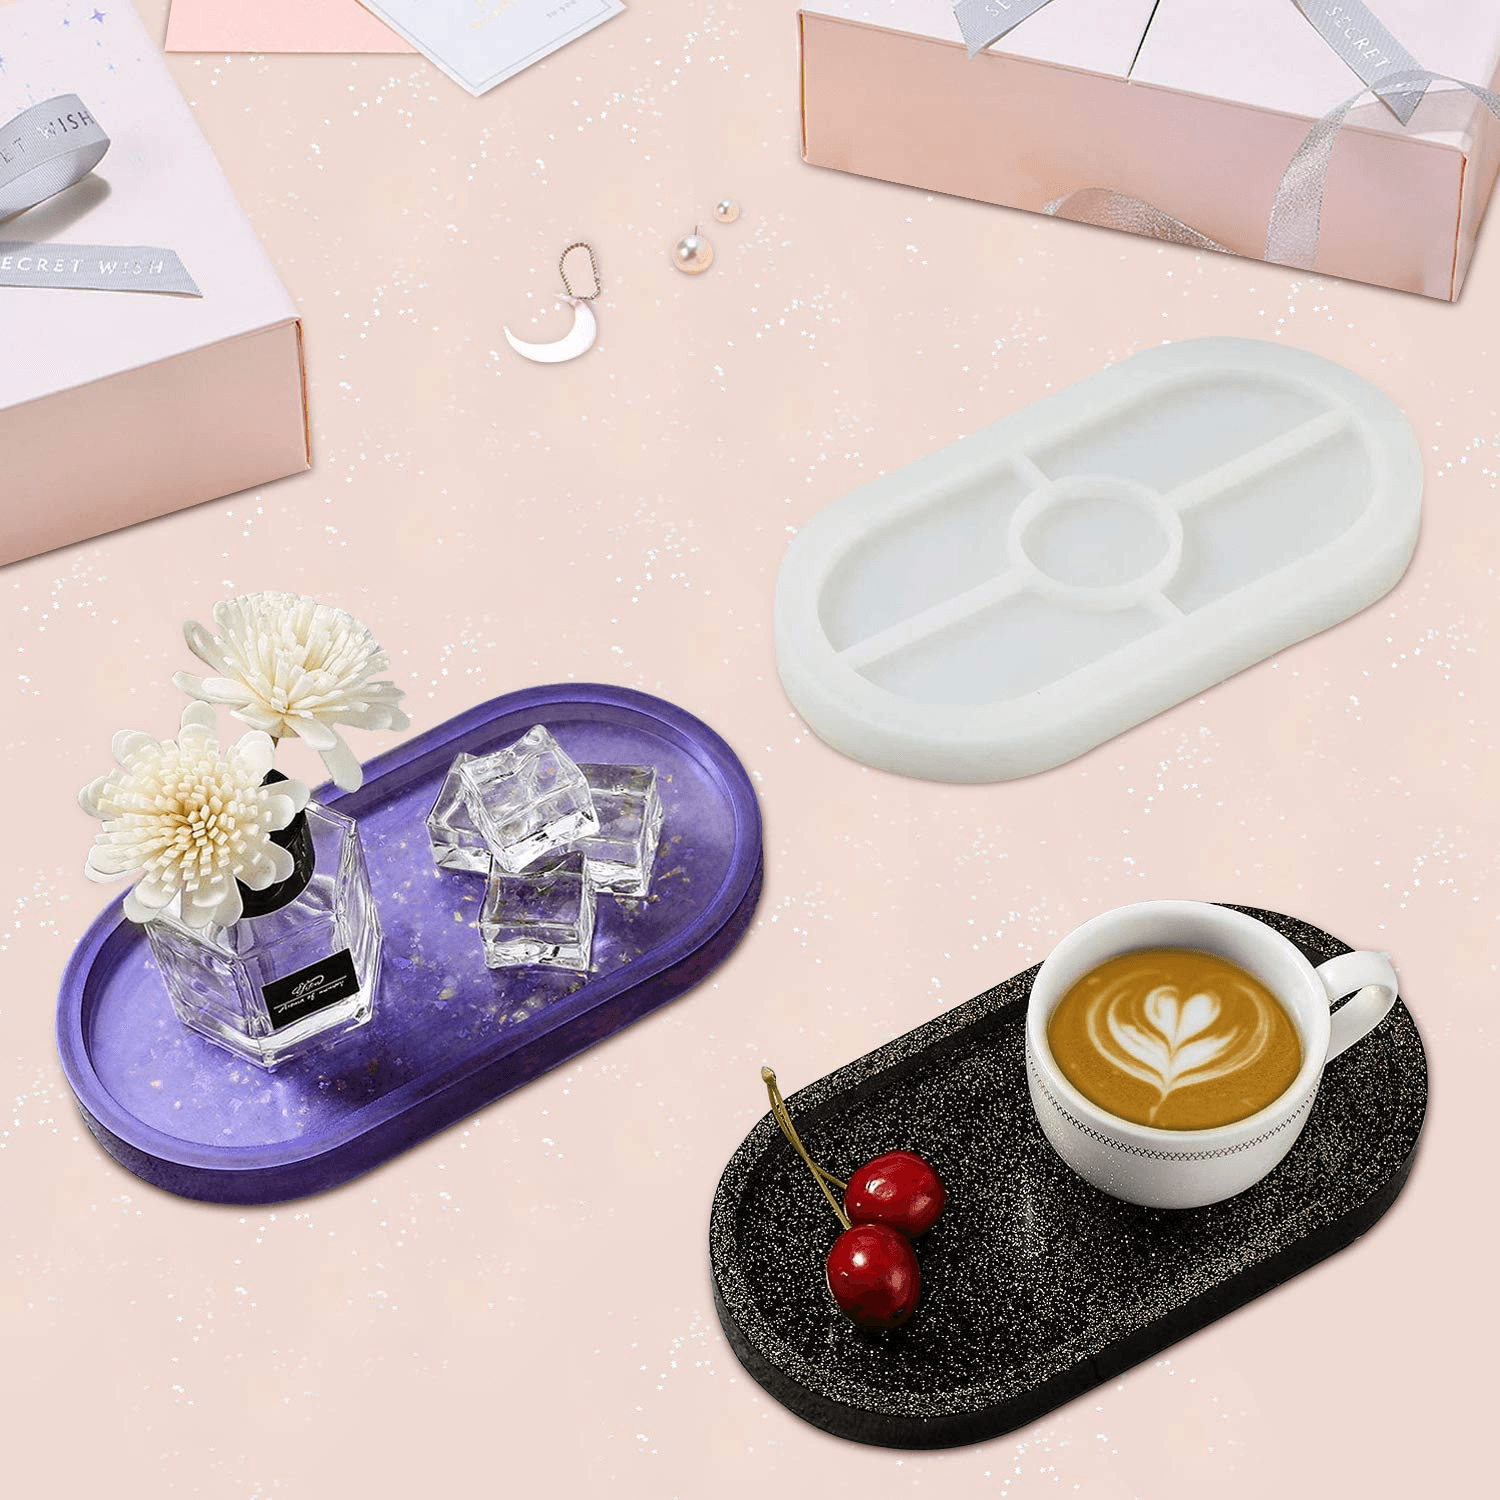 Oval Resin Mold / Oval Tray Mold for Resin - Concrete Mold - Plaster Mold - Mold for Home Decoration - Oval Tray Mold - Soap Mold - Ashtray Mold